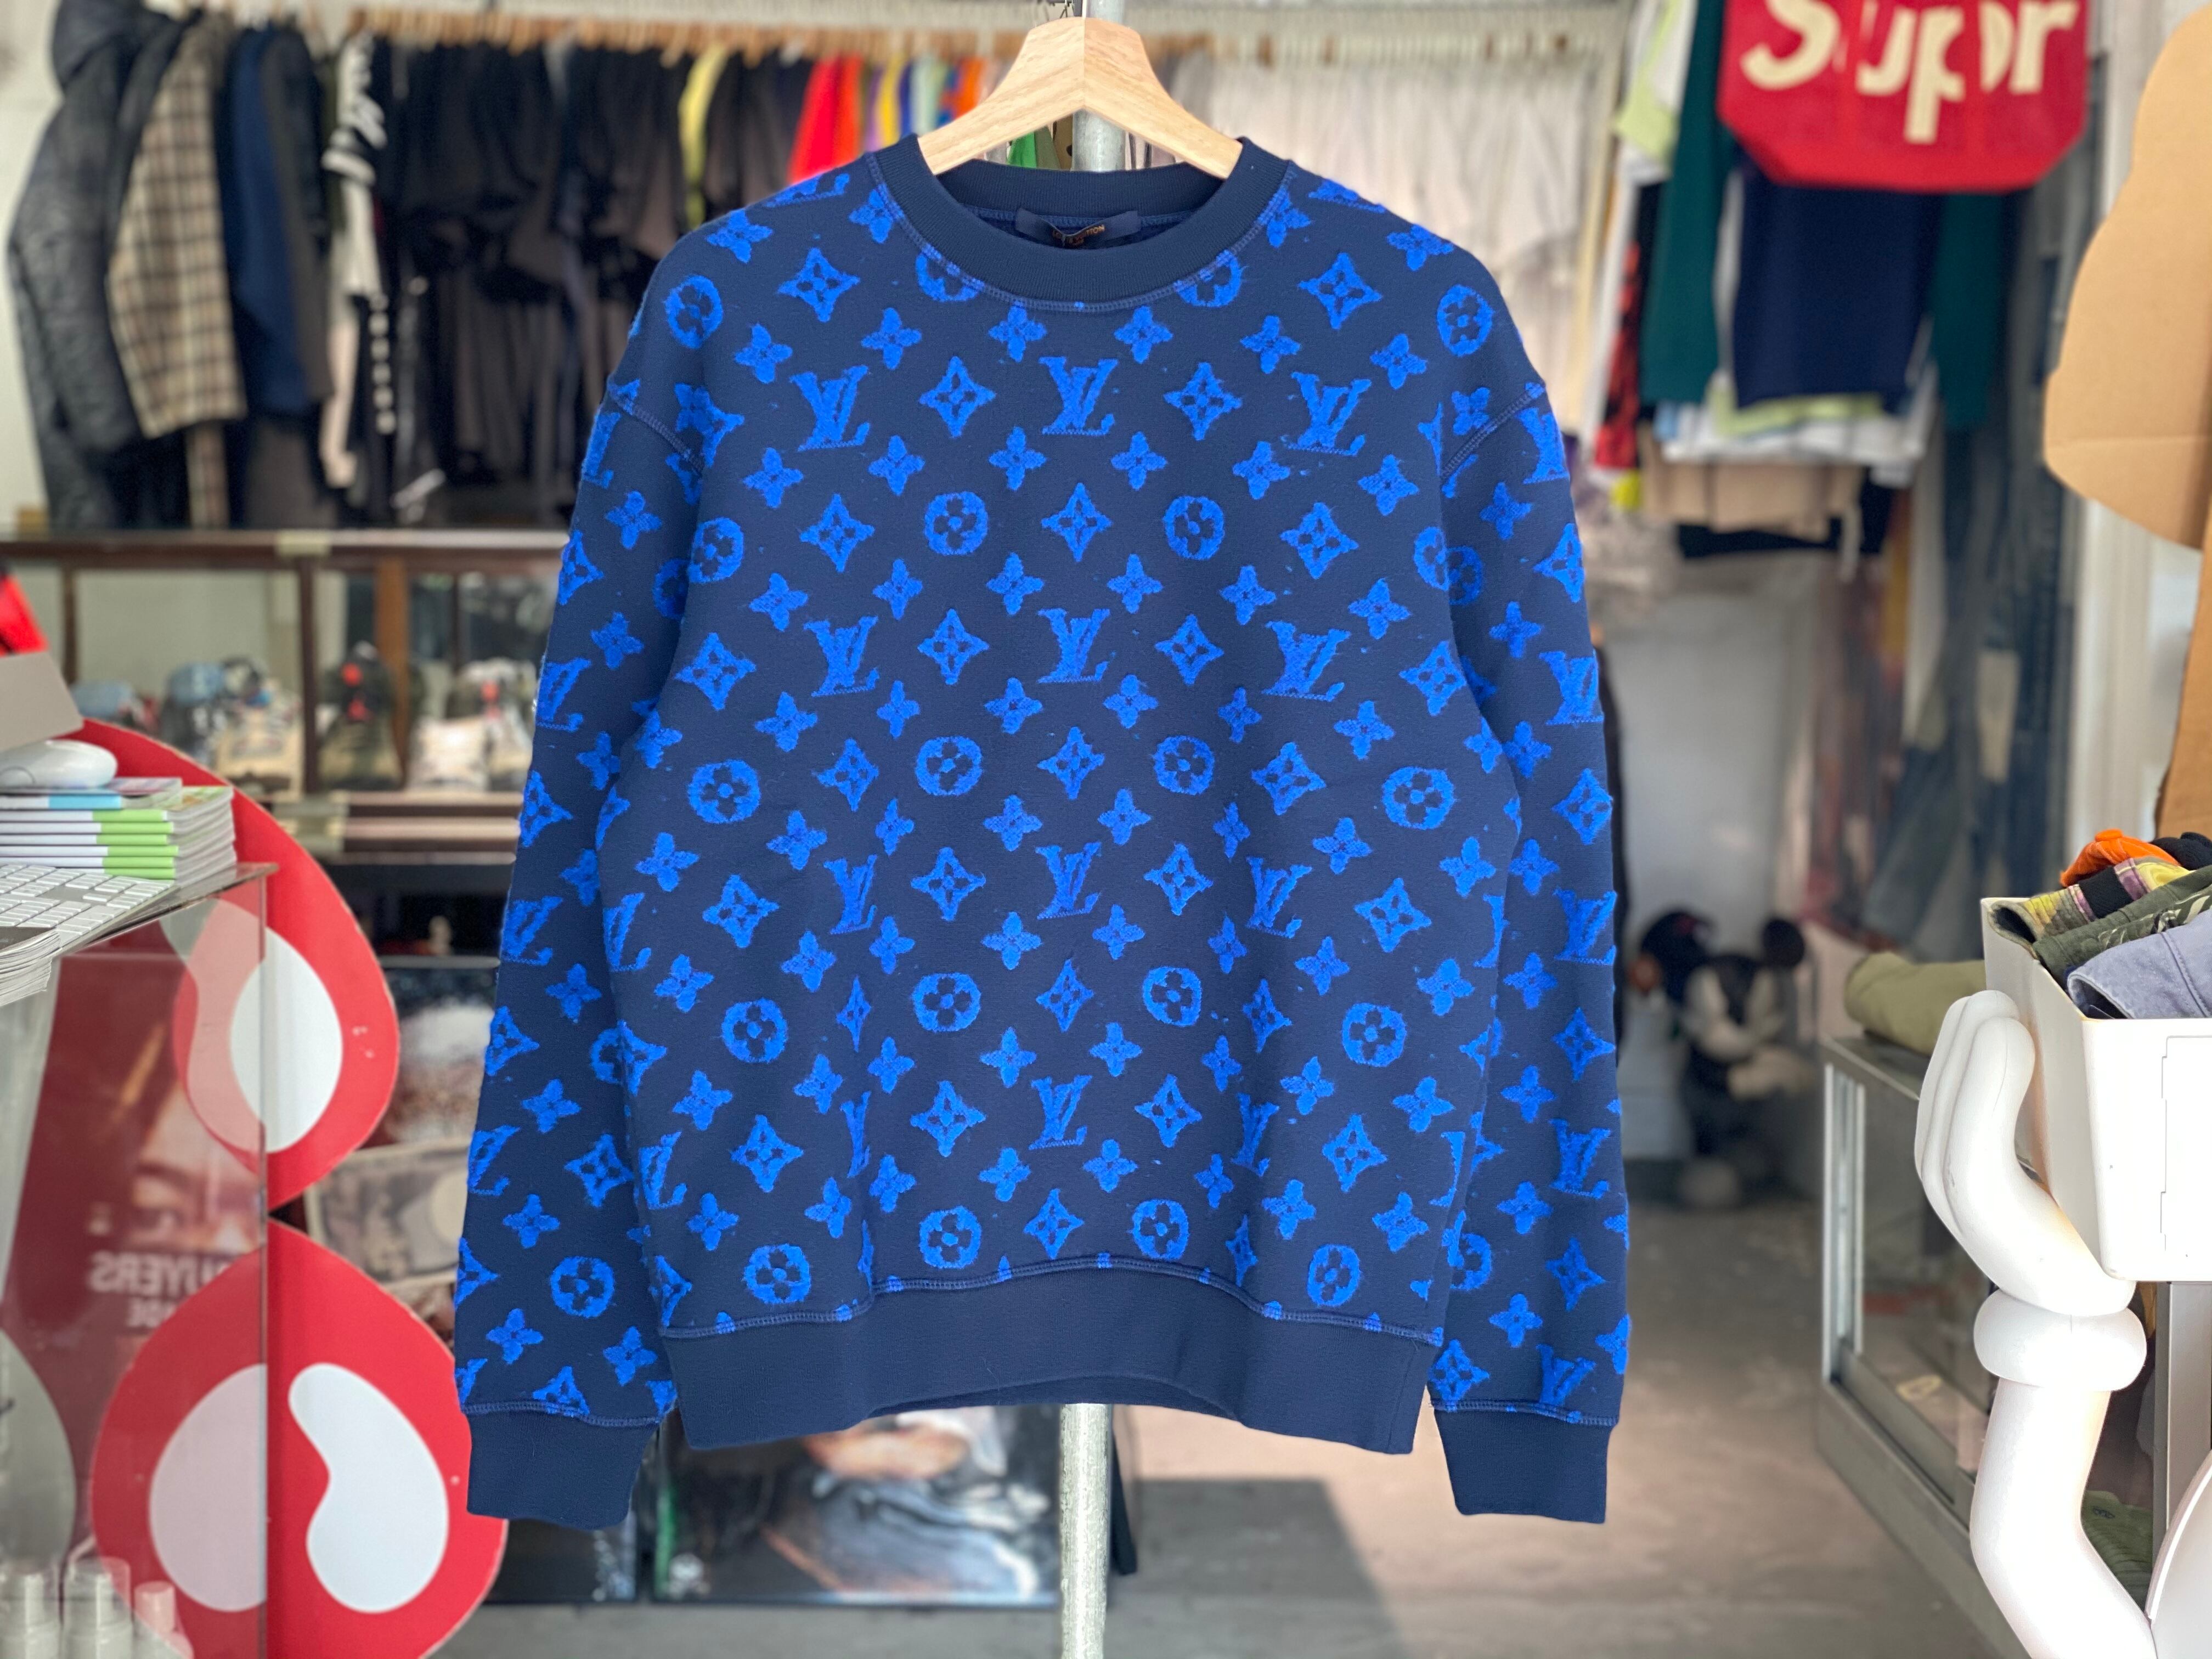 Quilted 3D Effect Chain Sweatshirt - Ready-to-Wear 1A5VFF